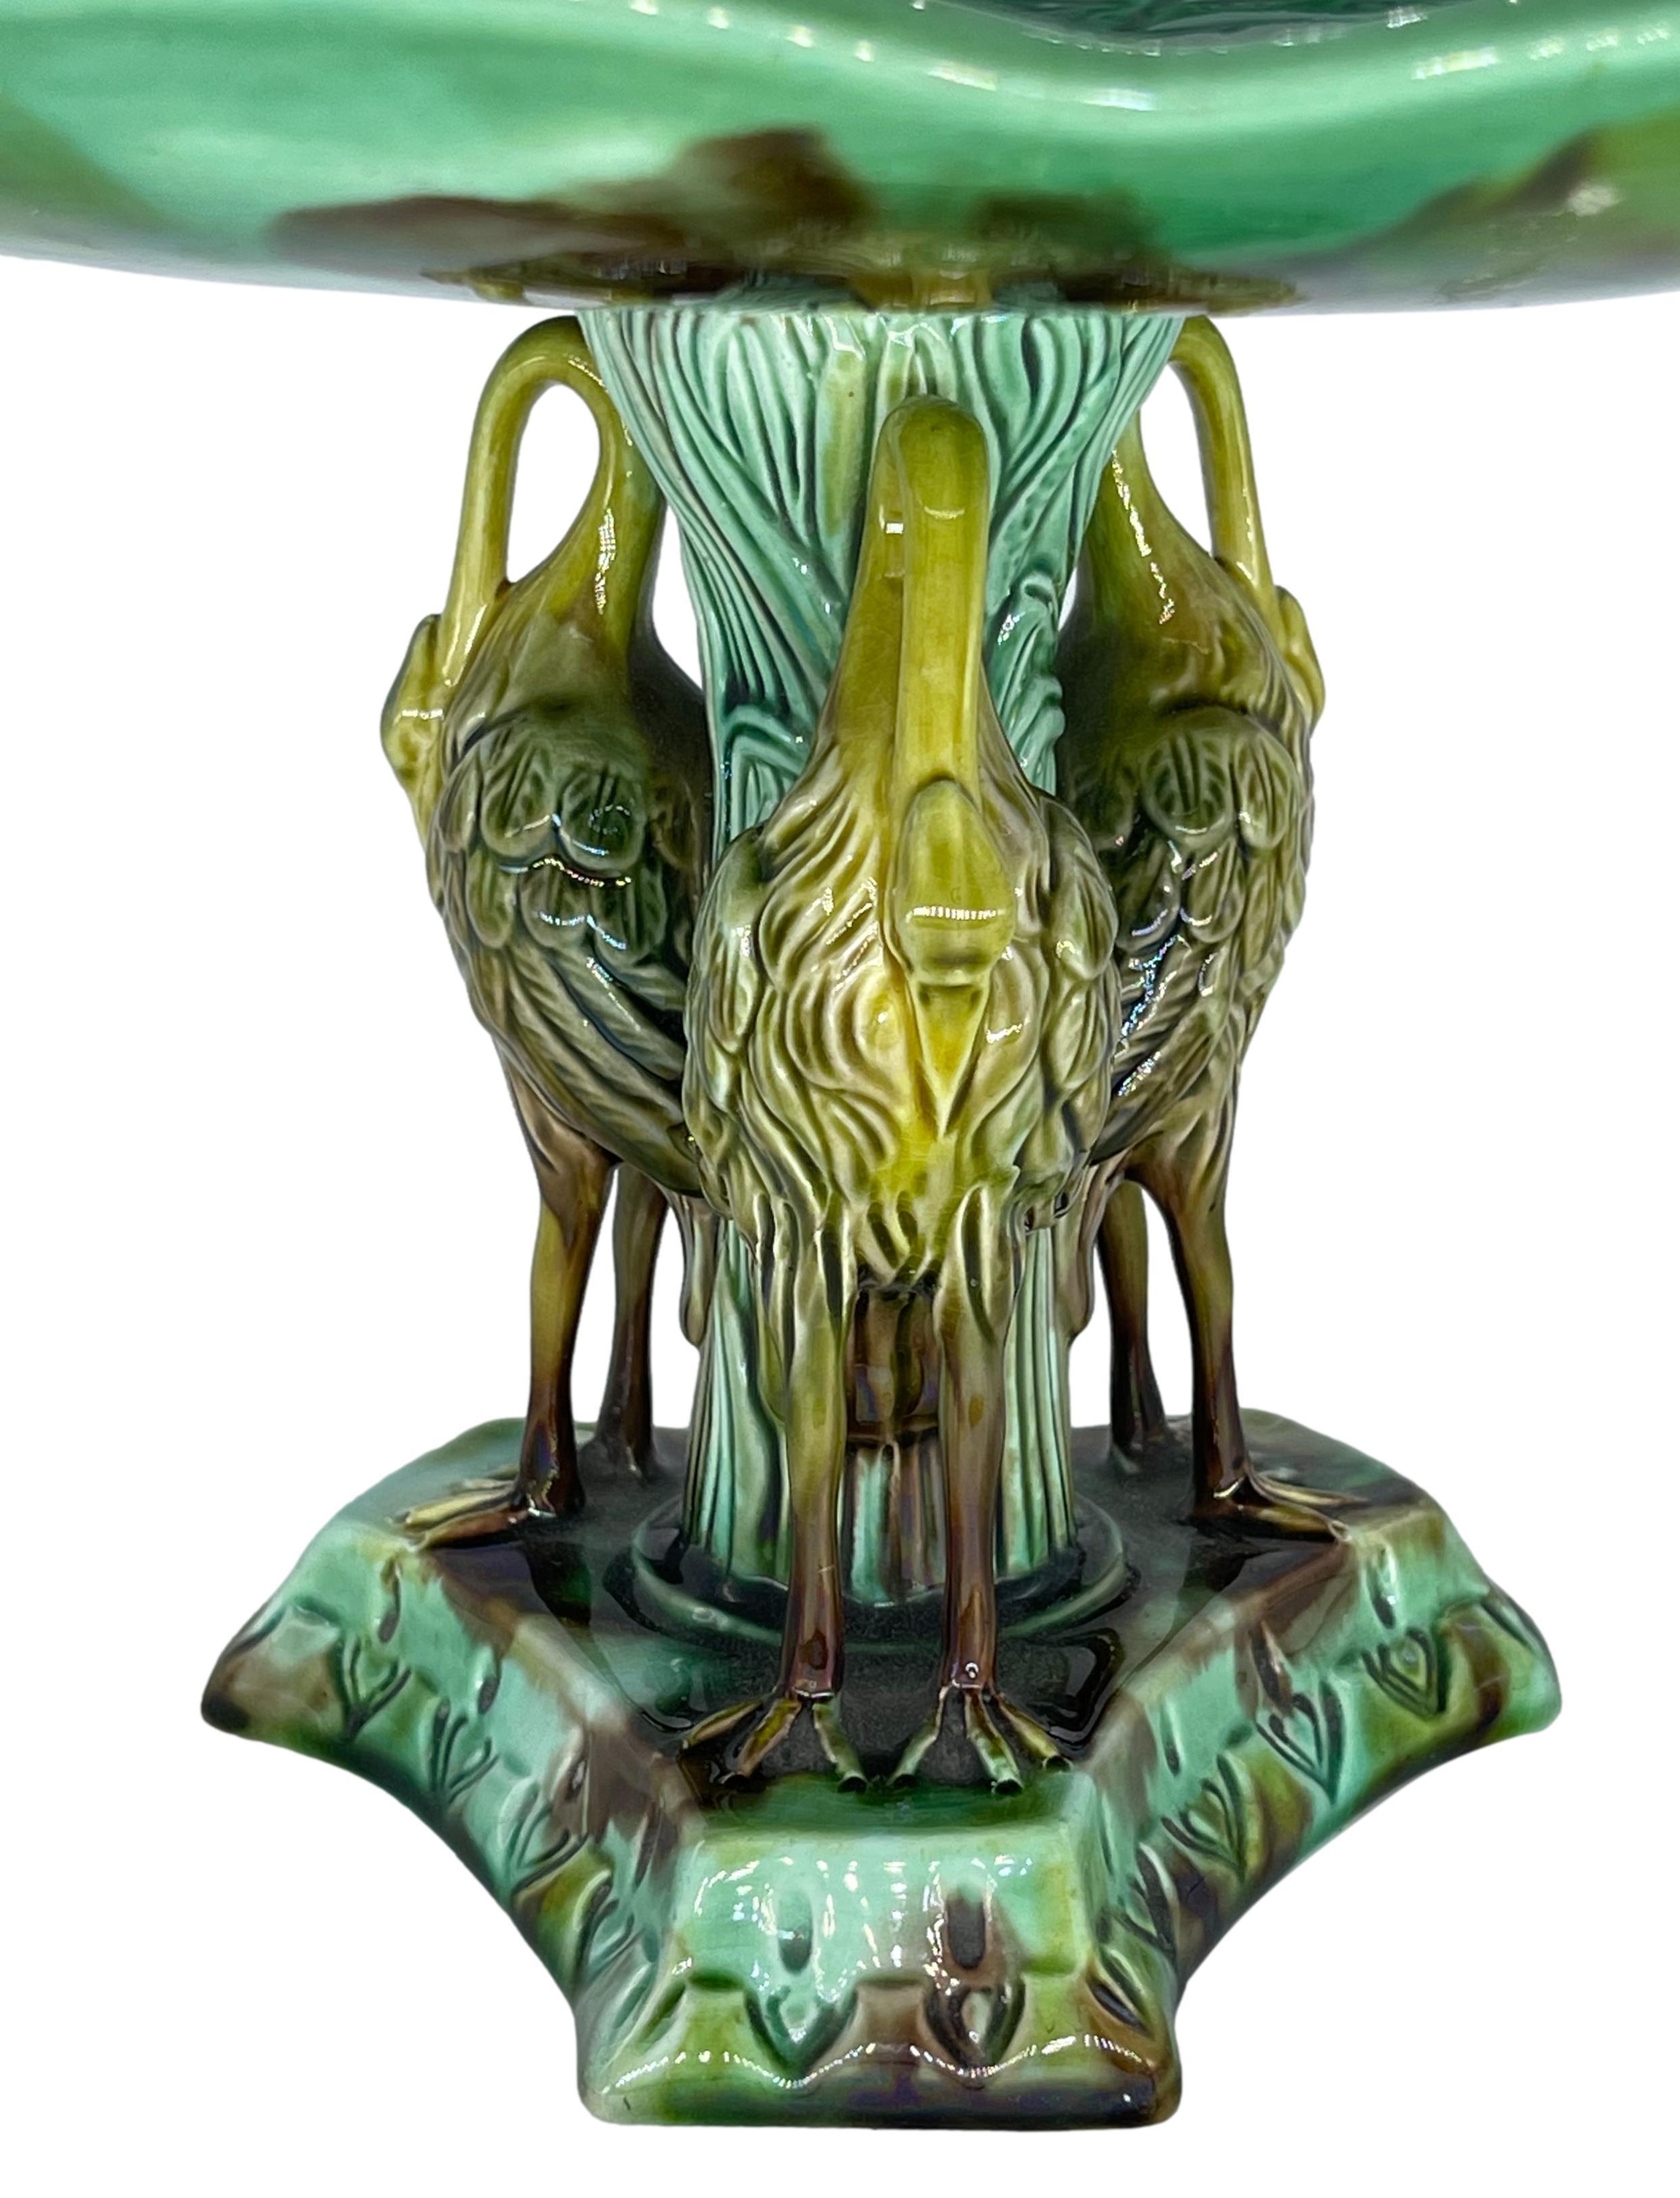 Molded Adams & Bromley Majolica Lily Pad Comport with Three Herons Pedestal, ca. 1880